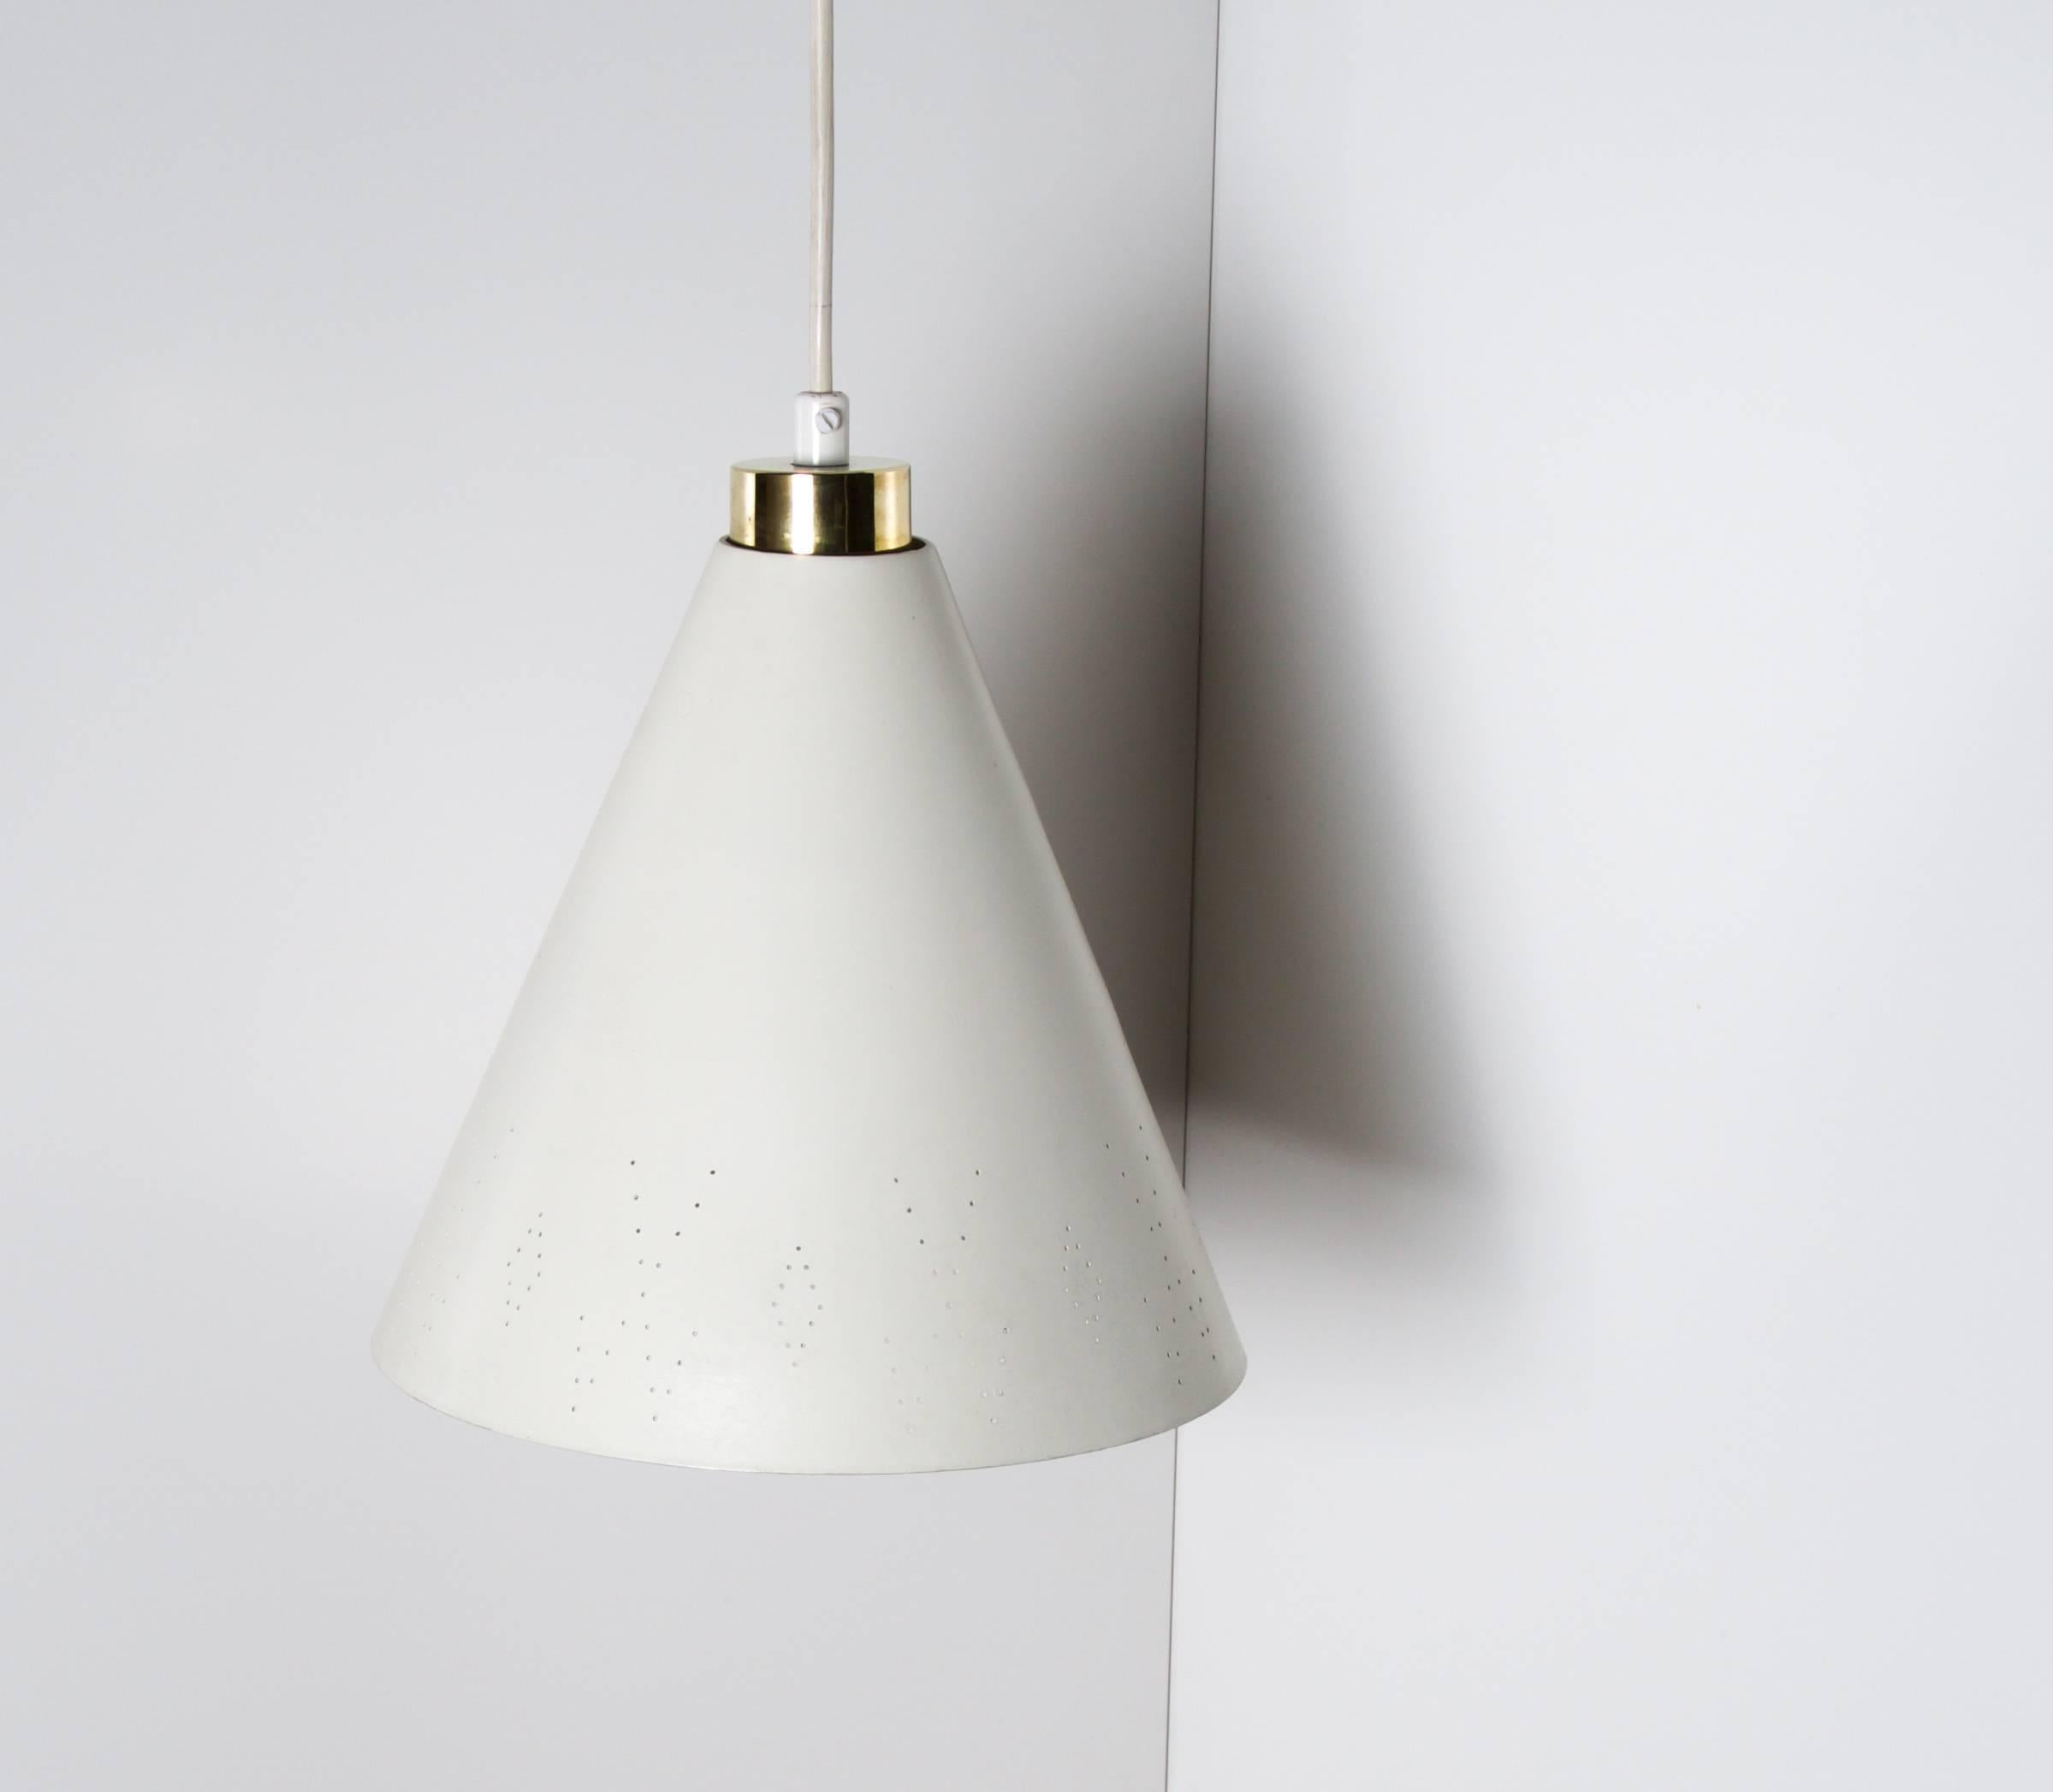 Perforated cone shaped ceiling lamp,

Finland, circa 1940s-early 1950s,
Taito Oy.

Brass and white painted metal.
Shade diameter 25 cm.
Shade height 31 cm.
Adjustable drop.

Literature: Finland House Lighting-catalog, pg.20 (models with